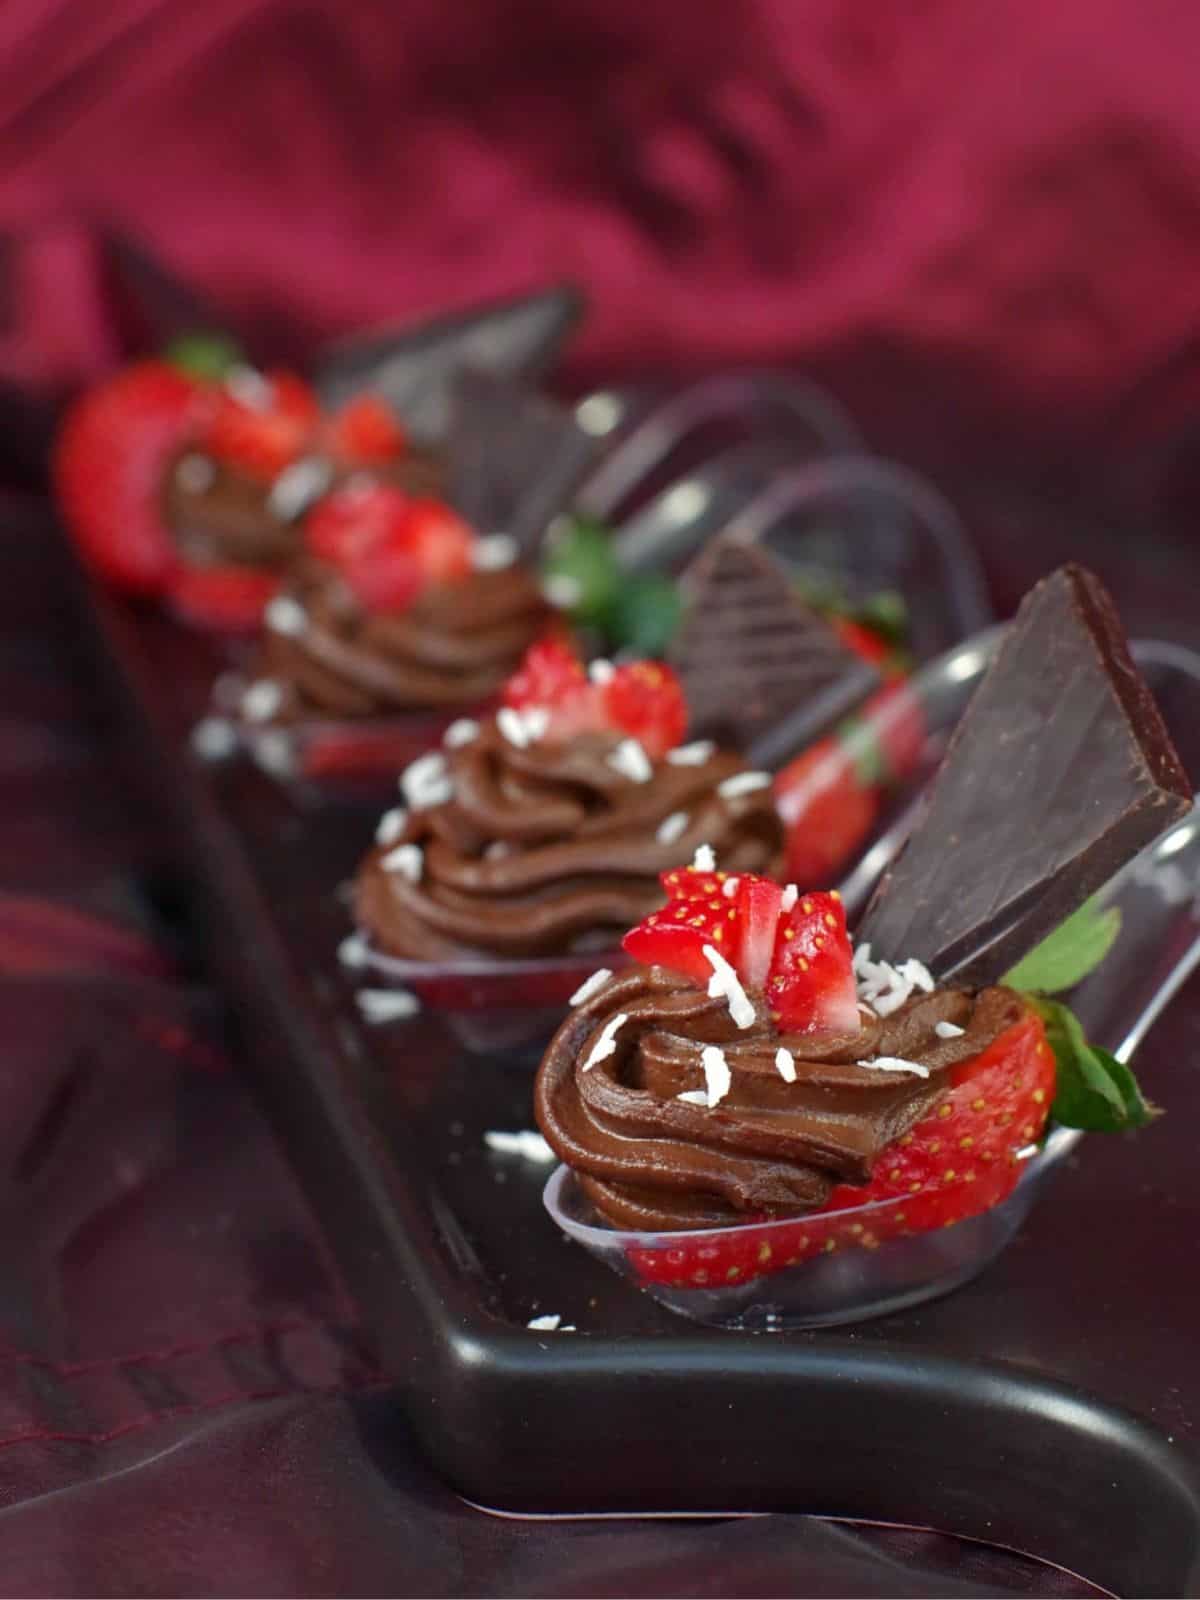 Divine No-bake Chocolate Avocado Mousse topped with Strawberries in dainty spoons 